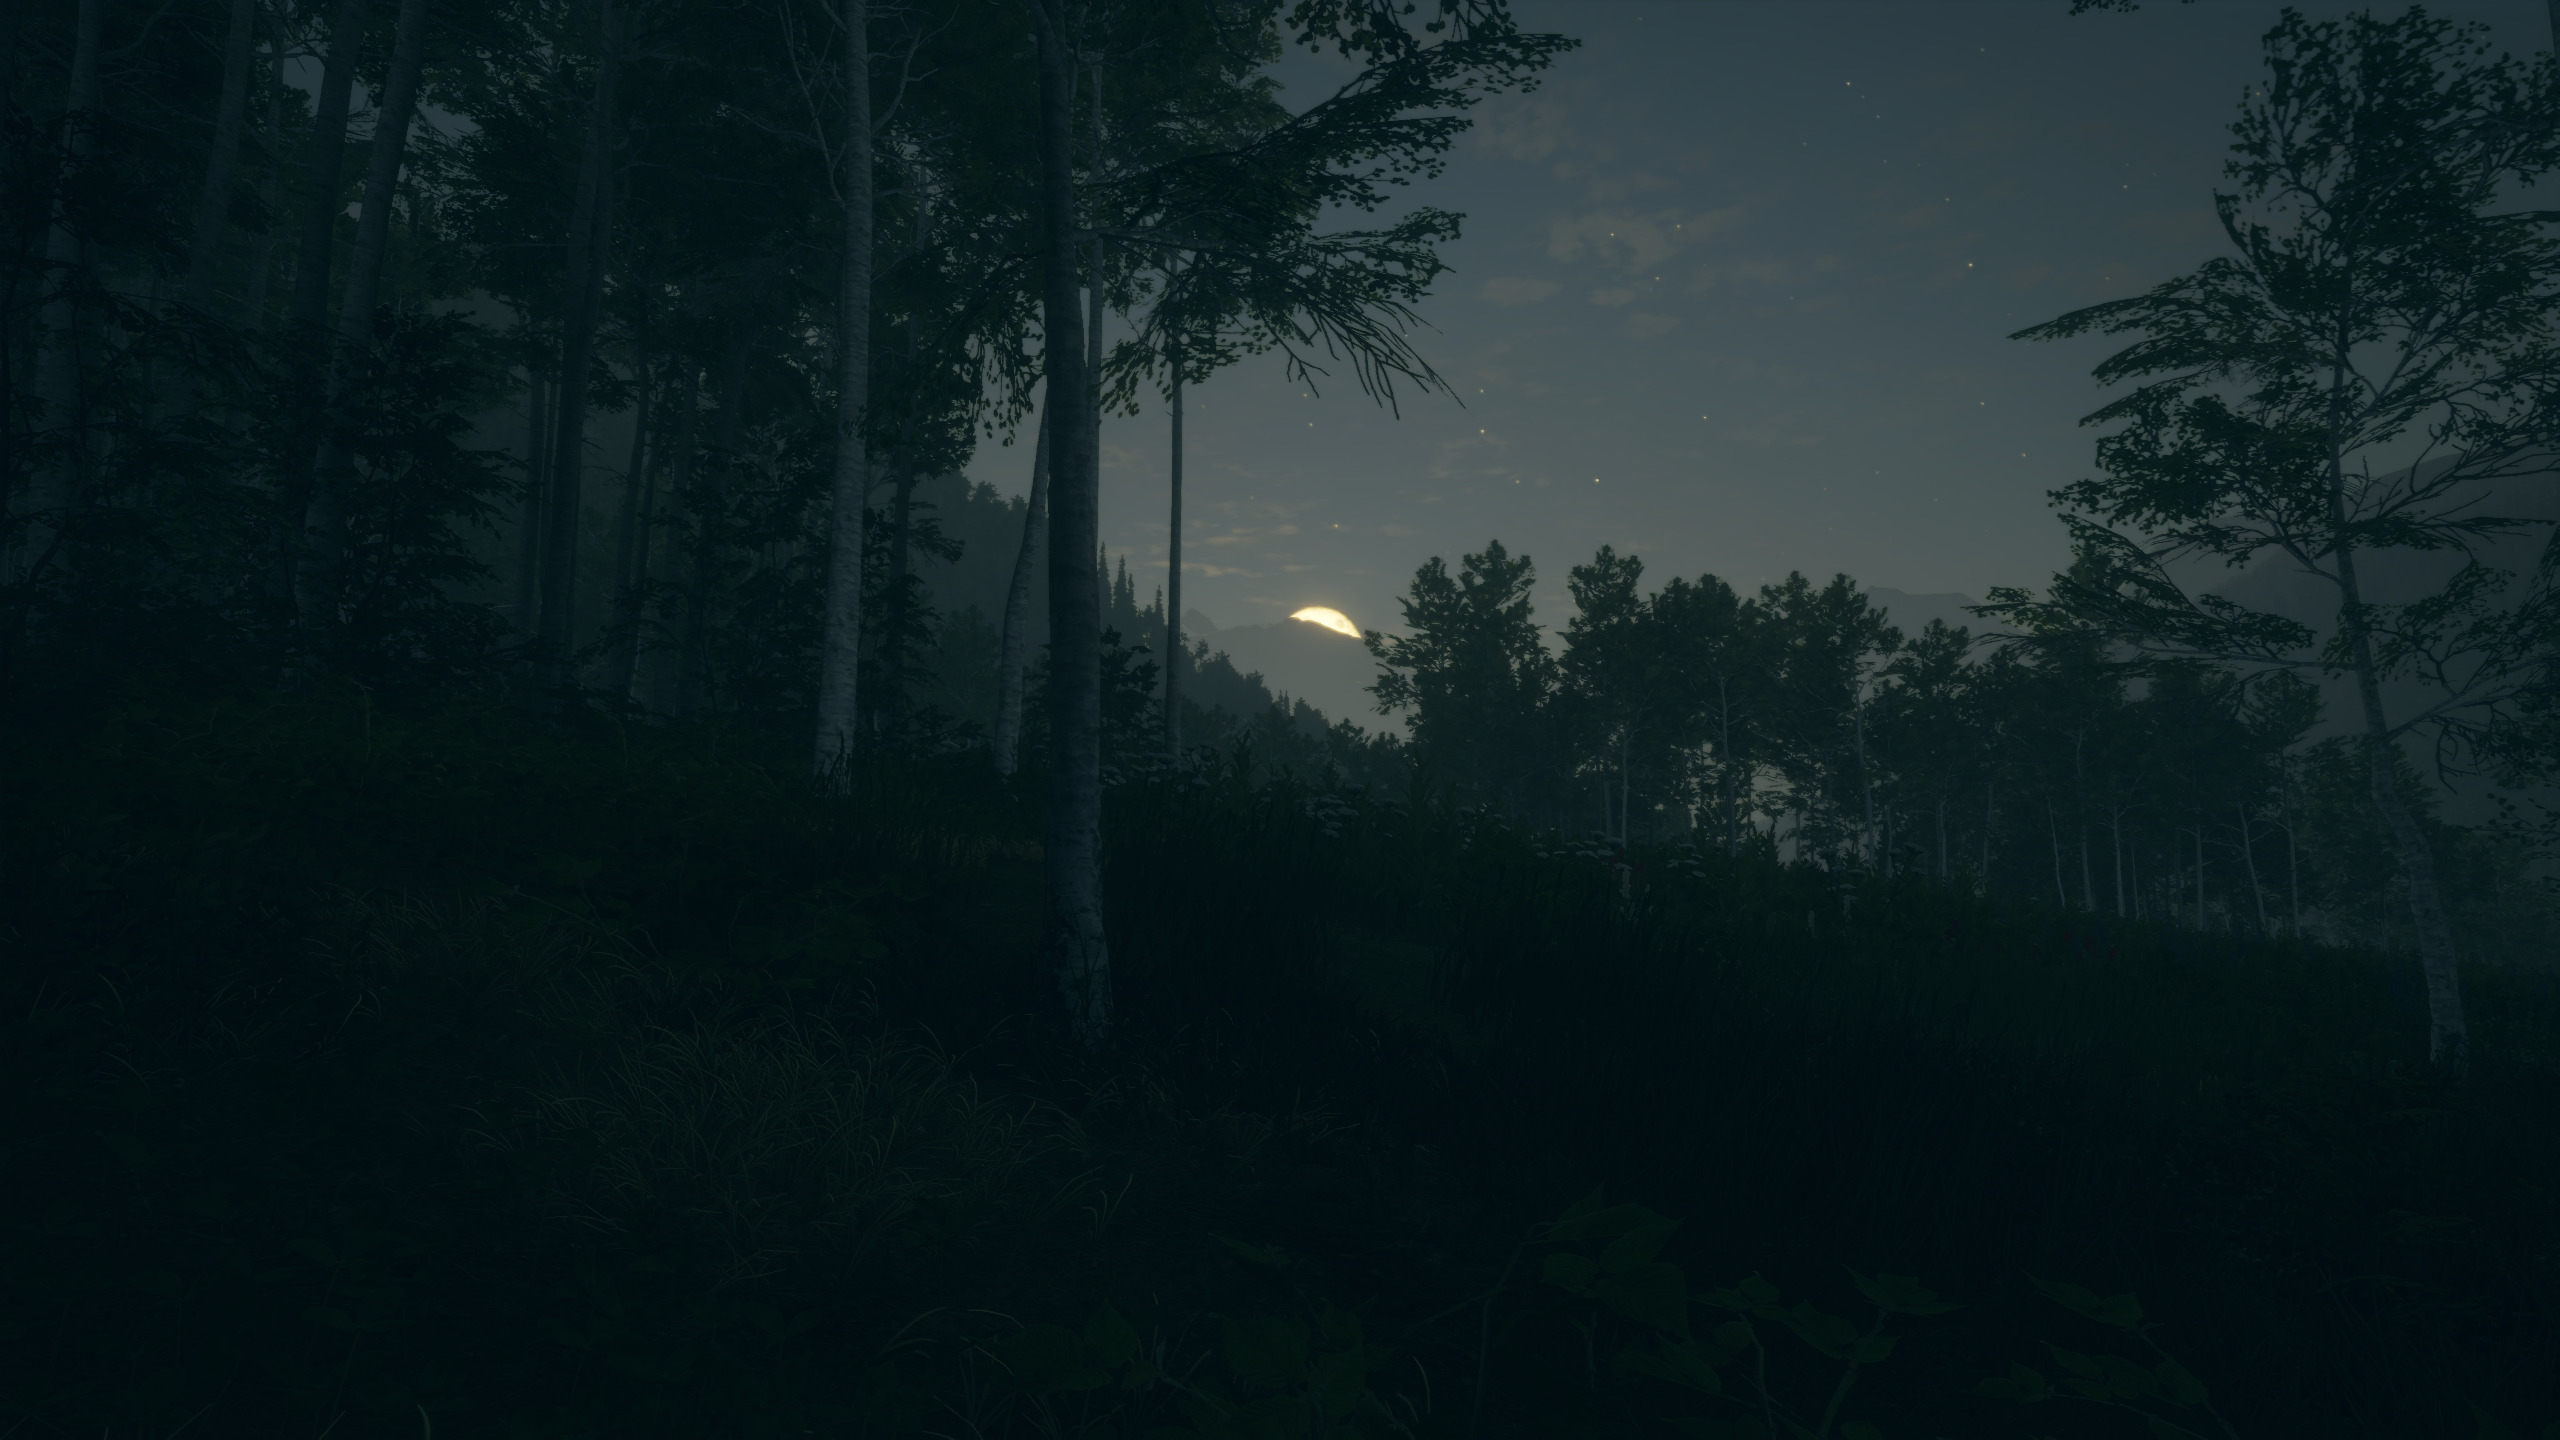 TheHunter Call Of The Wild Night Video Game Art Moon Moonlight Forest Trees Sky Clouds Mountains Vid 2560x1440